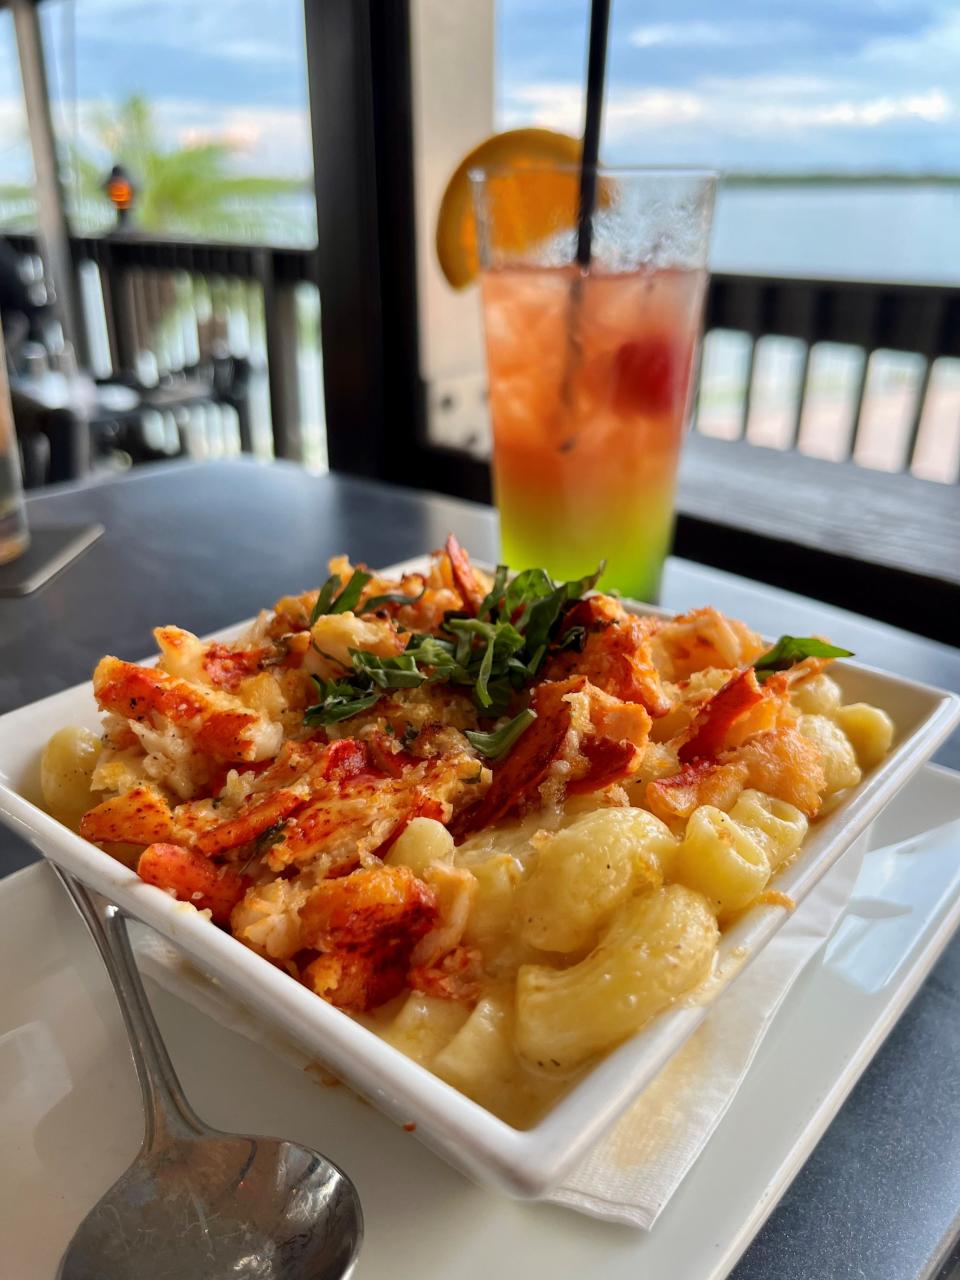 Gourmet lobster mac is served overlooking Estero Bay at Flipper's On The Bay on Fort Myers Beach.